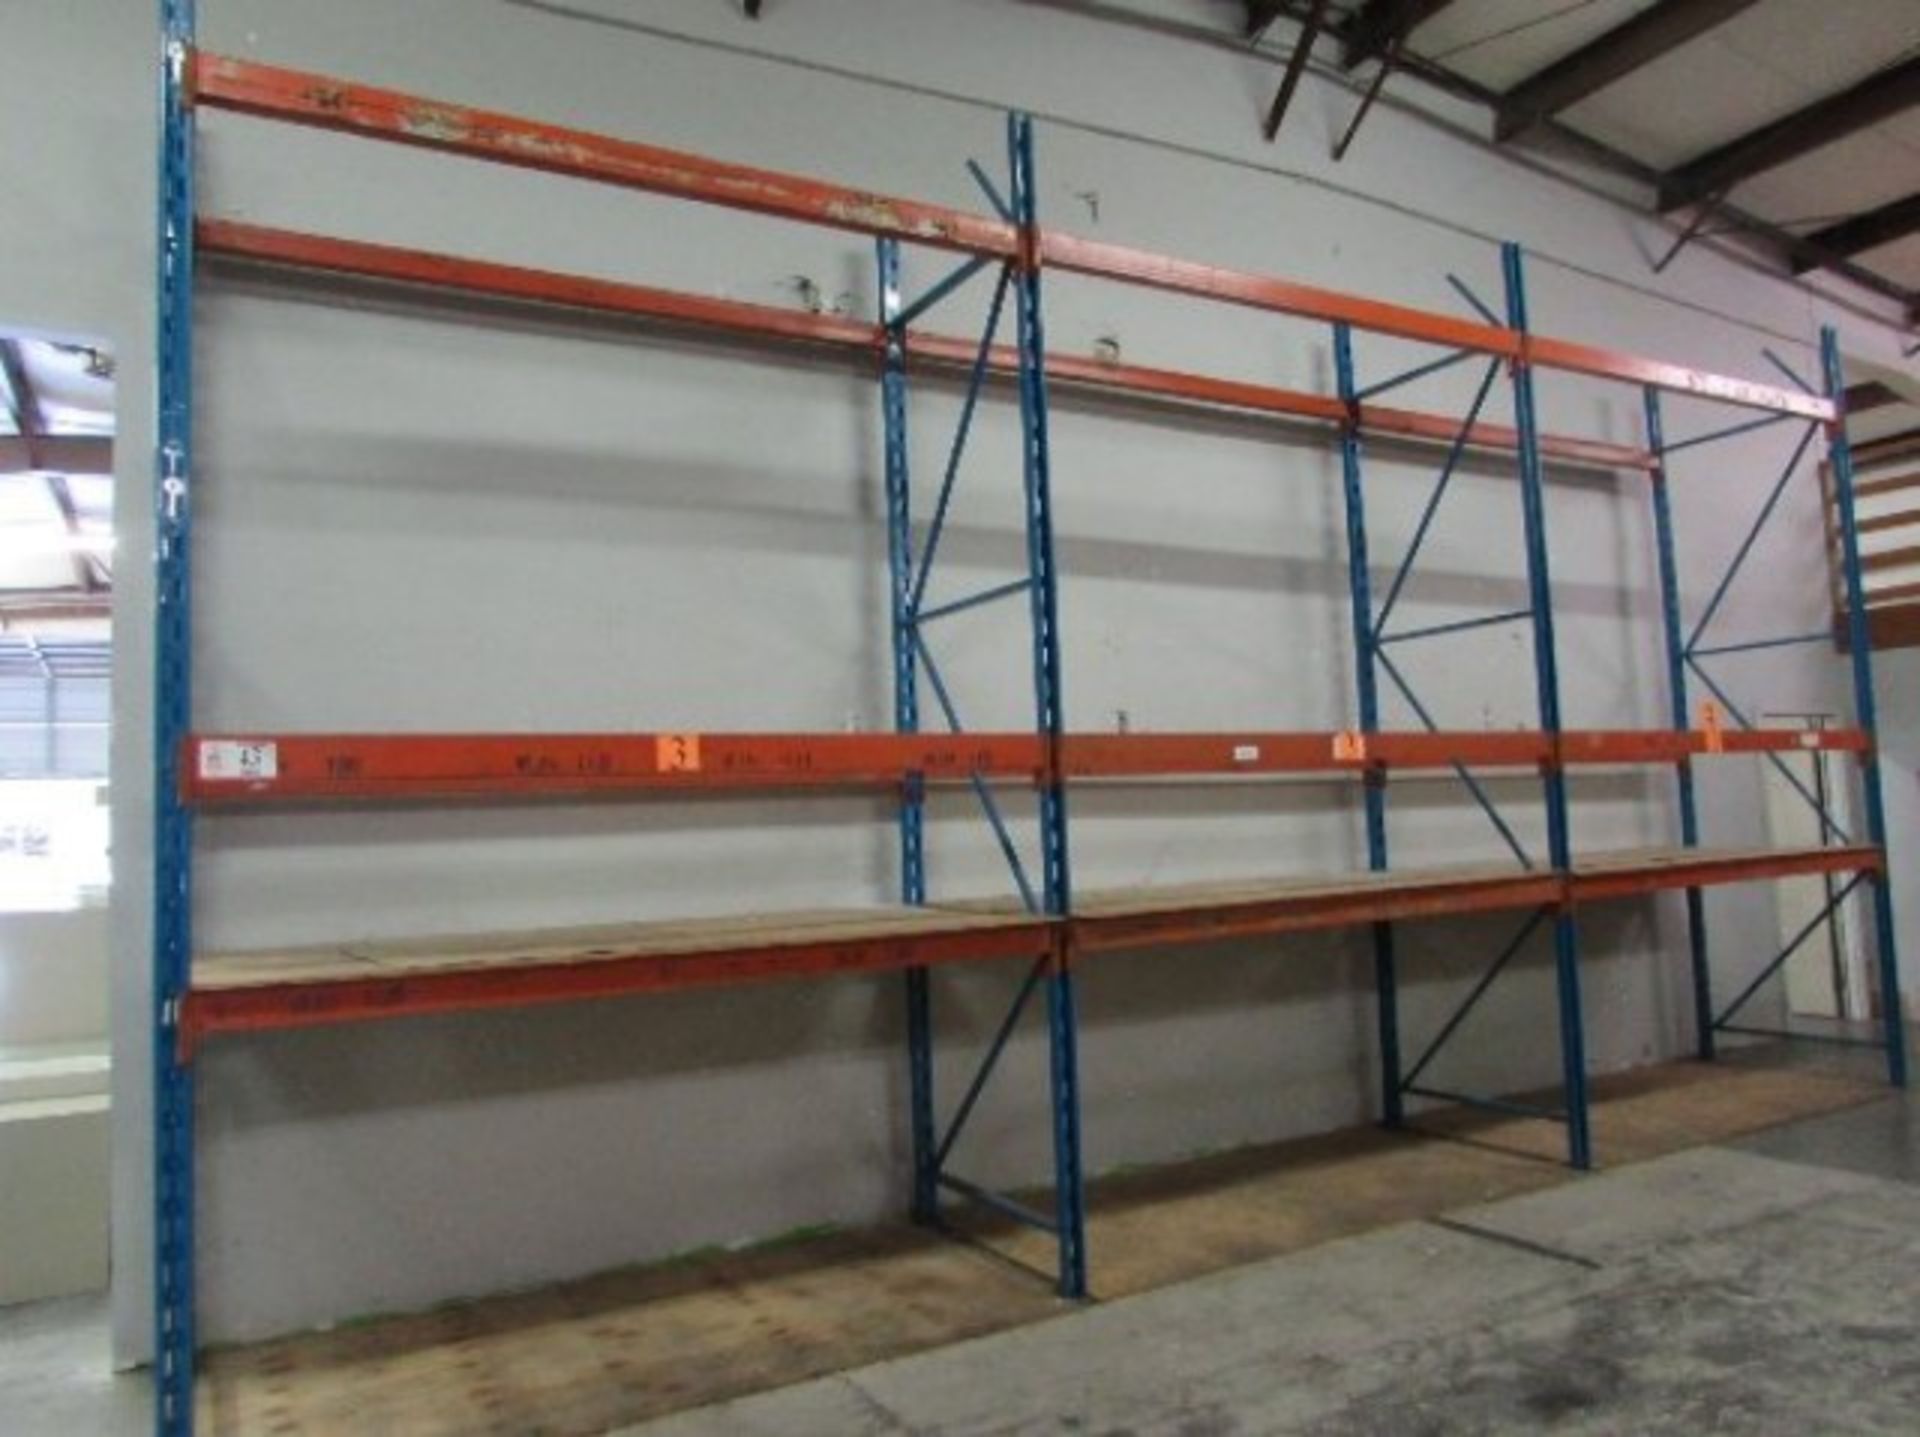 (3) Sections of Pallet Racking 42" x 96" x 168"